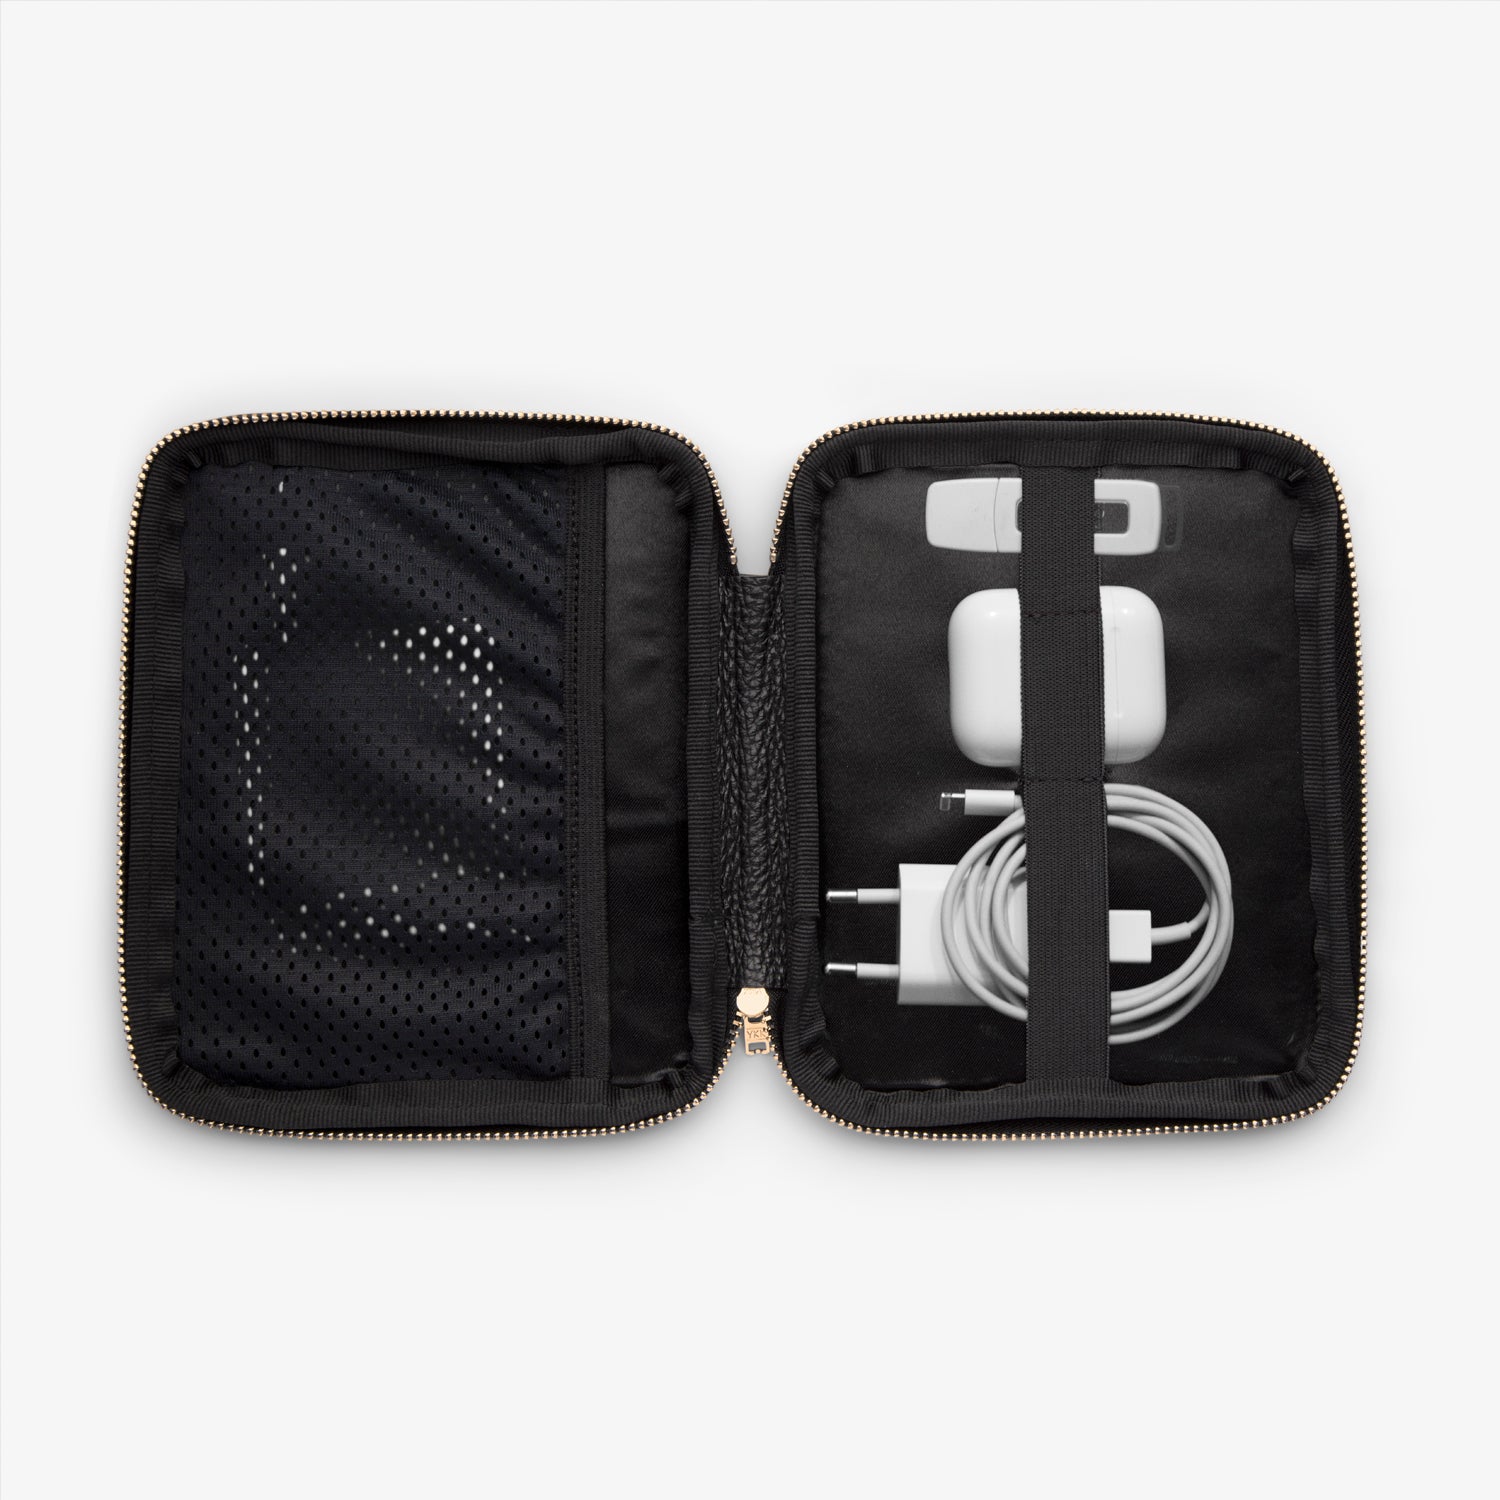 Shows the inside of a cable pocket displaying a phone charger, Airpods, a USB-stick and other cables, all neatly arranged and organized for easy access while on the go.